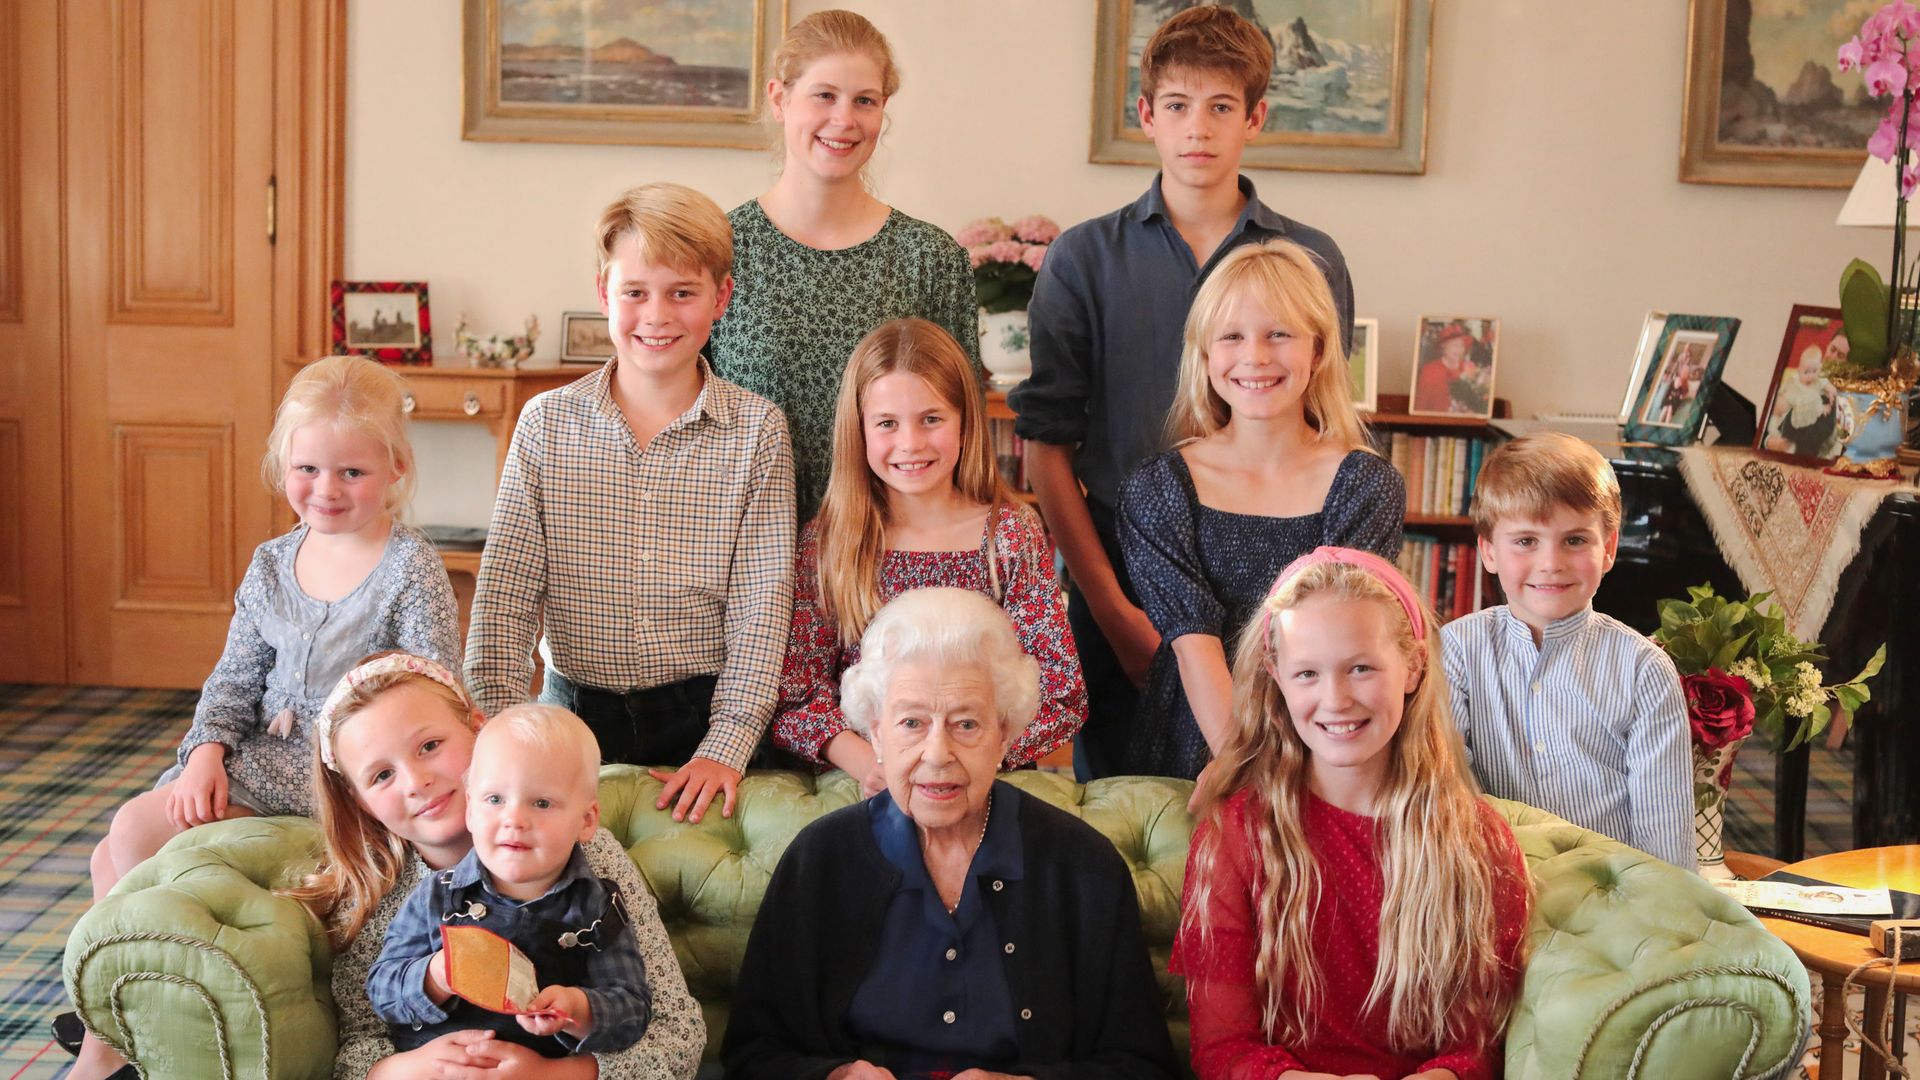 The Queen with some of her grandchildren and great grandchildren (back row, left to right) Lady Louise Windsor Mountbatten-Windsor and James, Prince Edward, (middle row, left to right) Lena Elizabeth Tindall, Prince George, Princess Charlotte, Isla Phillips, Prince Louis, and (front row, left to right) Mia Grace Tindall holding Lucas Tindall, Queen Elizabeth II and Savannah Phillips